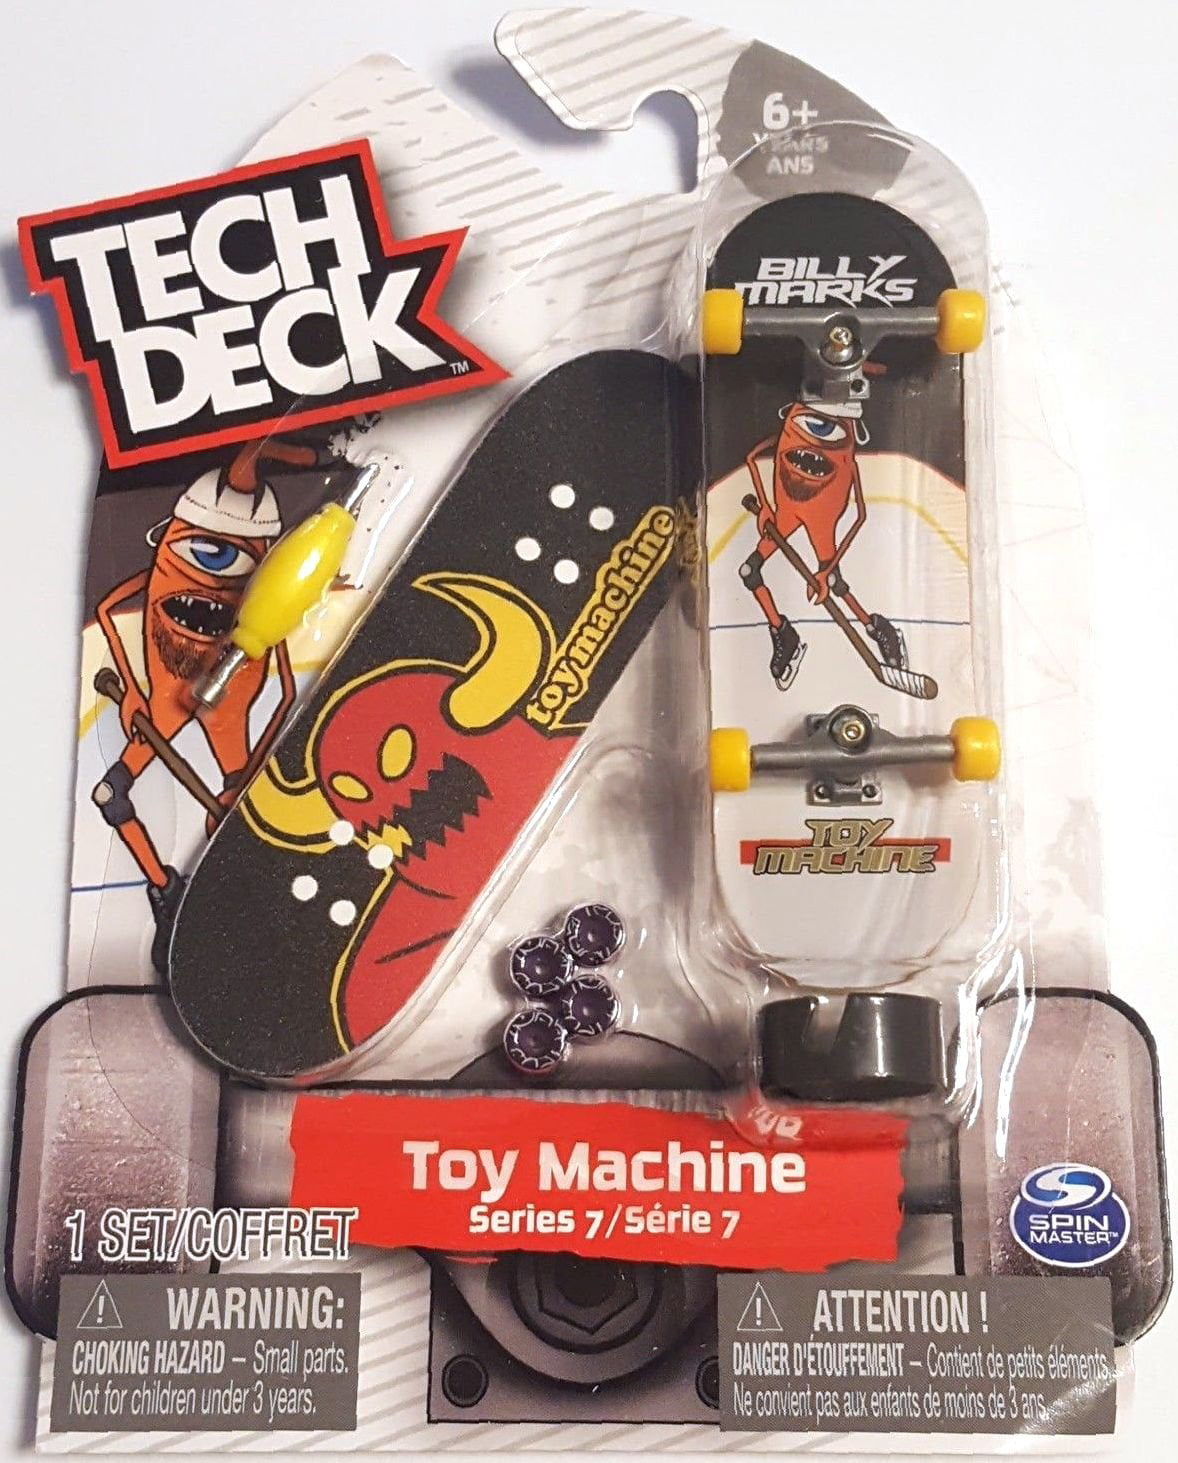 Details about   Tech Deck Toy Machine Series 13 Billy Marks Fingerboard Skateboard Ships Fast 